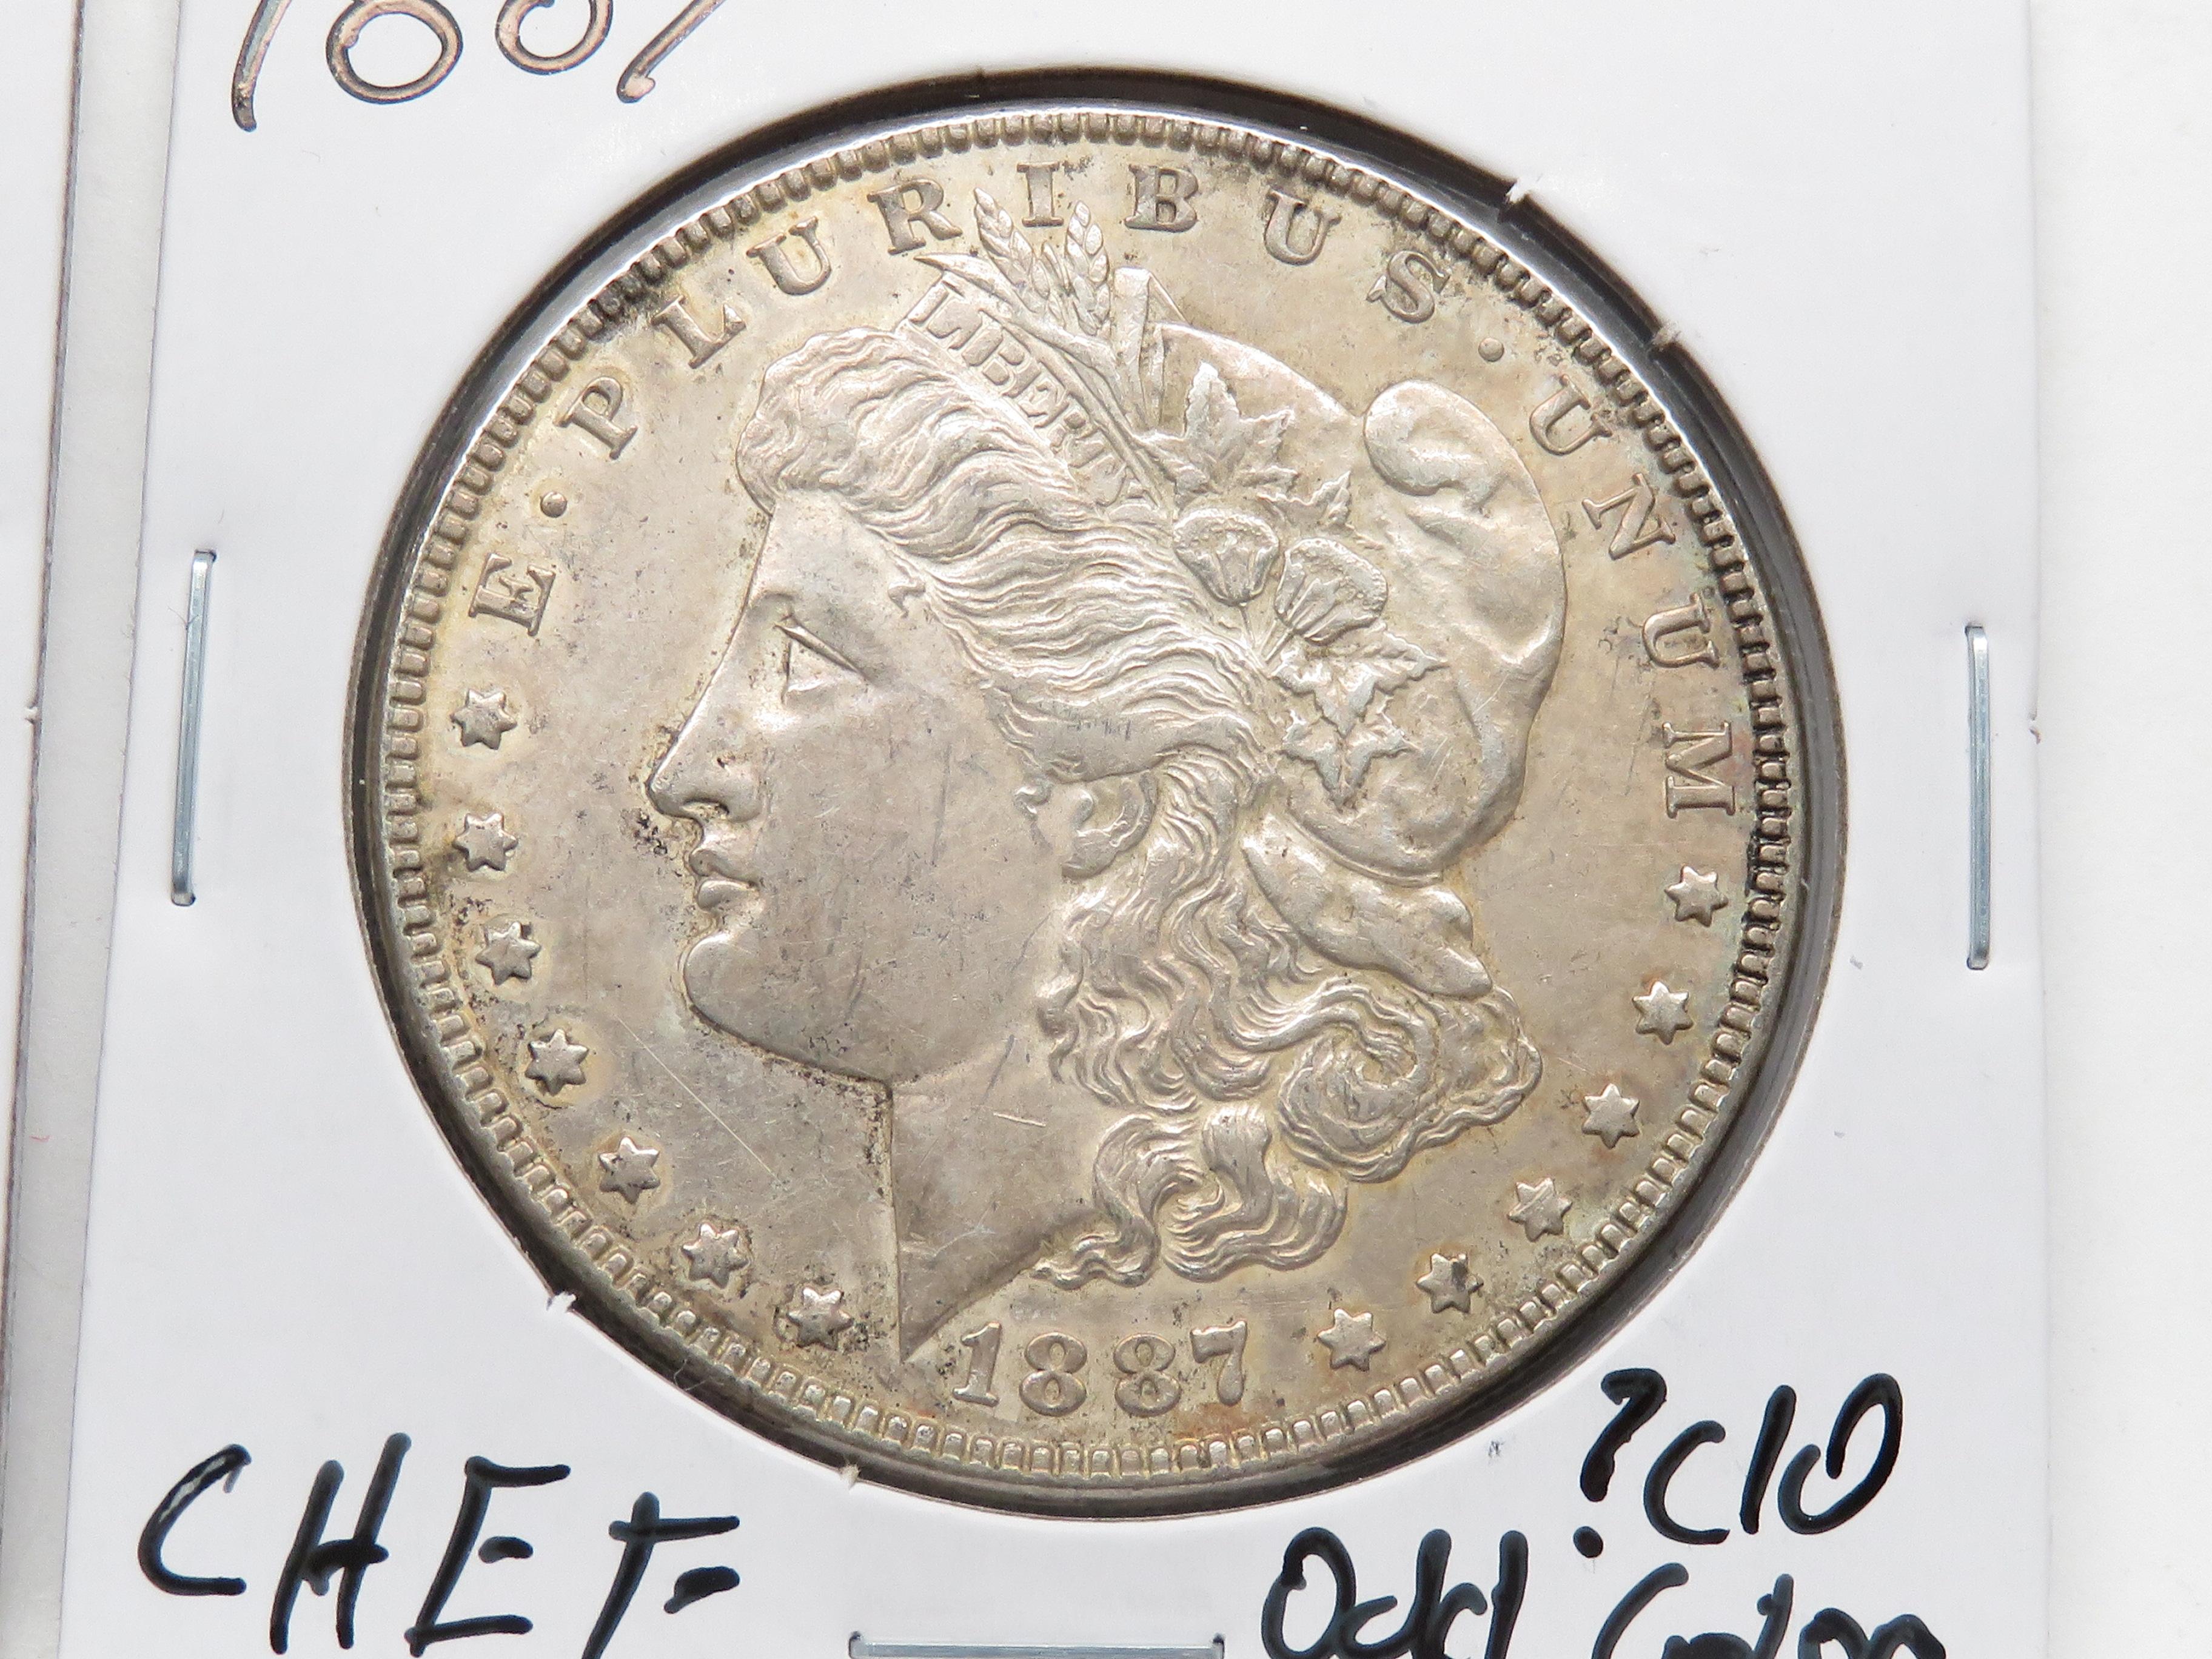 2 Morgan $: 1886 AU toned, 1887 CH EF ?cleaned odd color